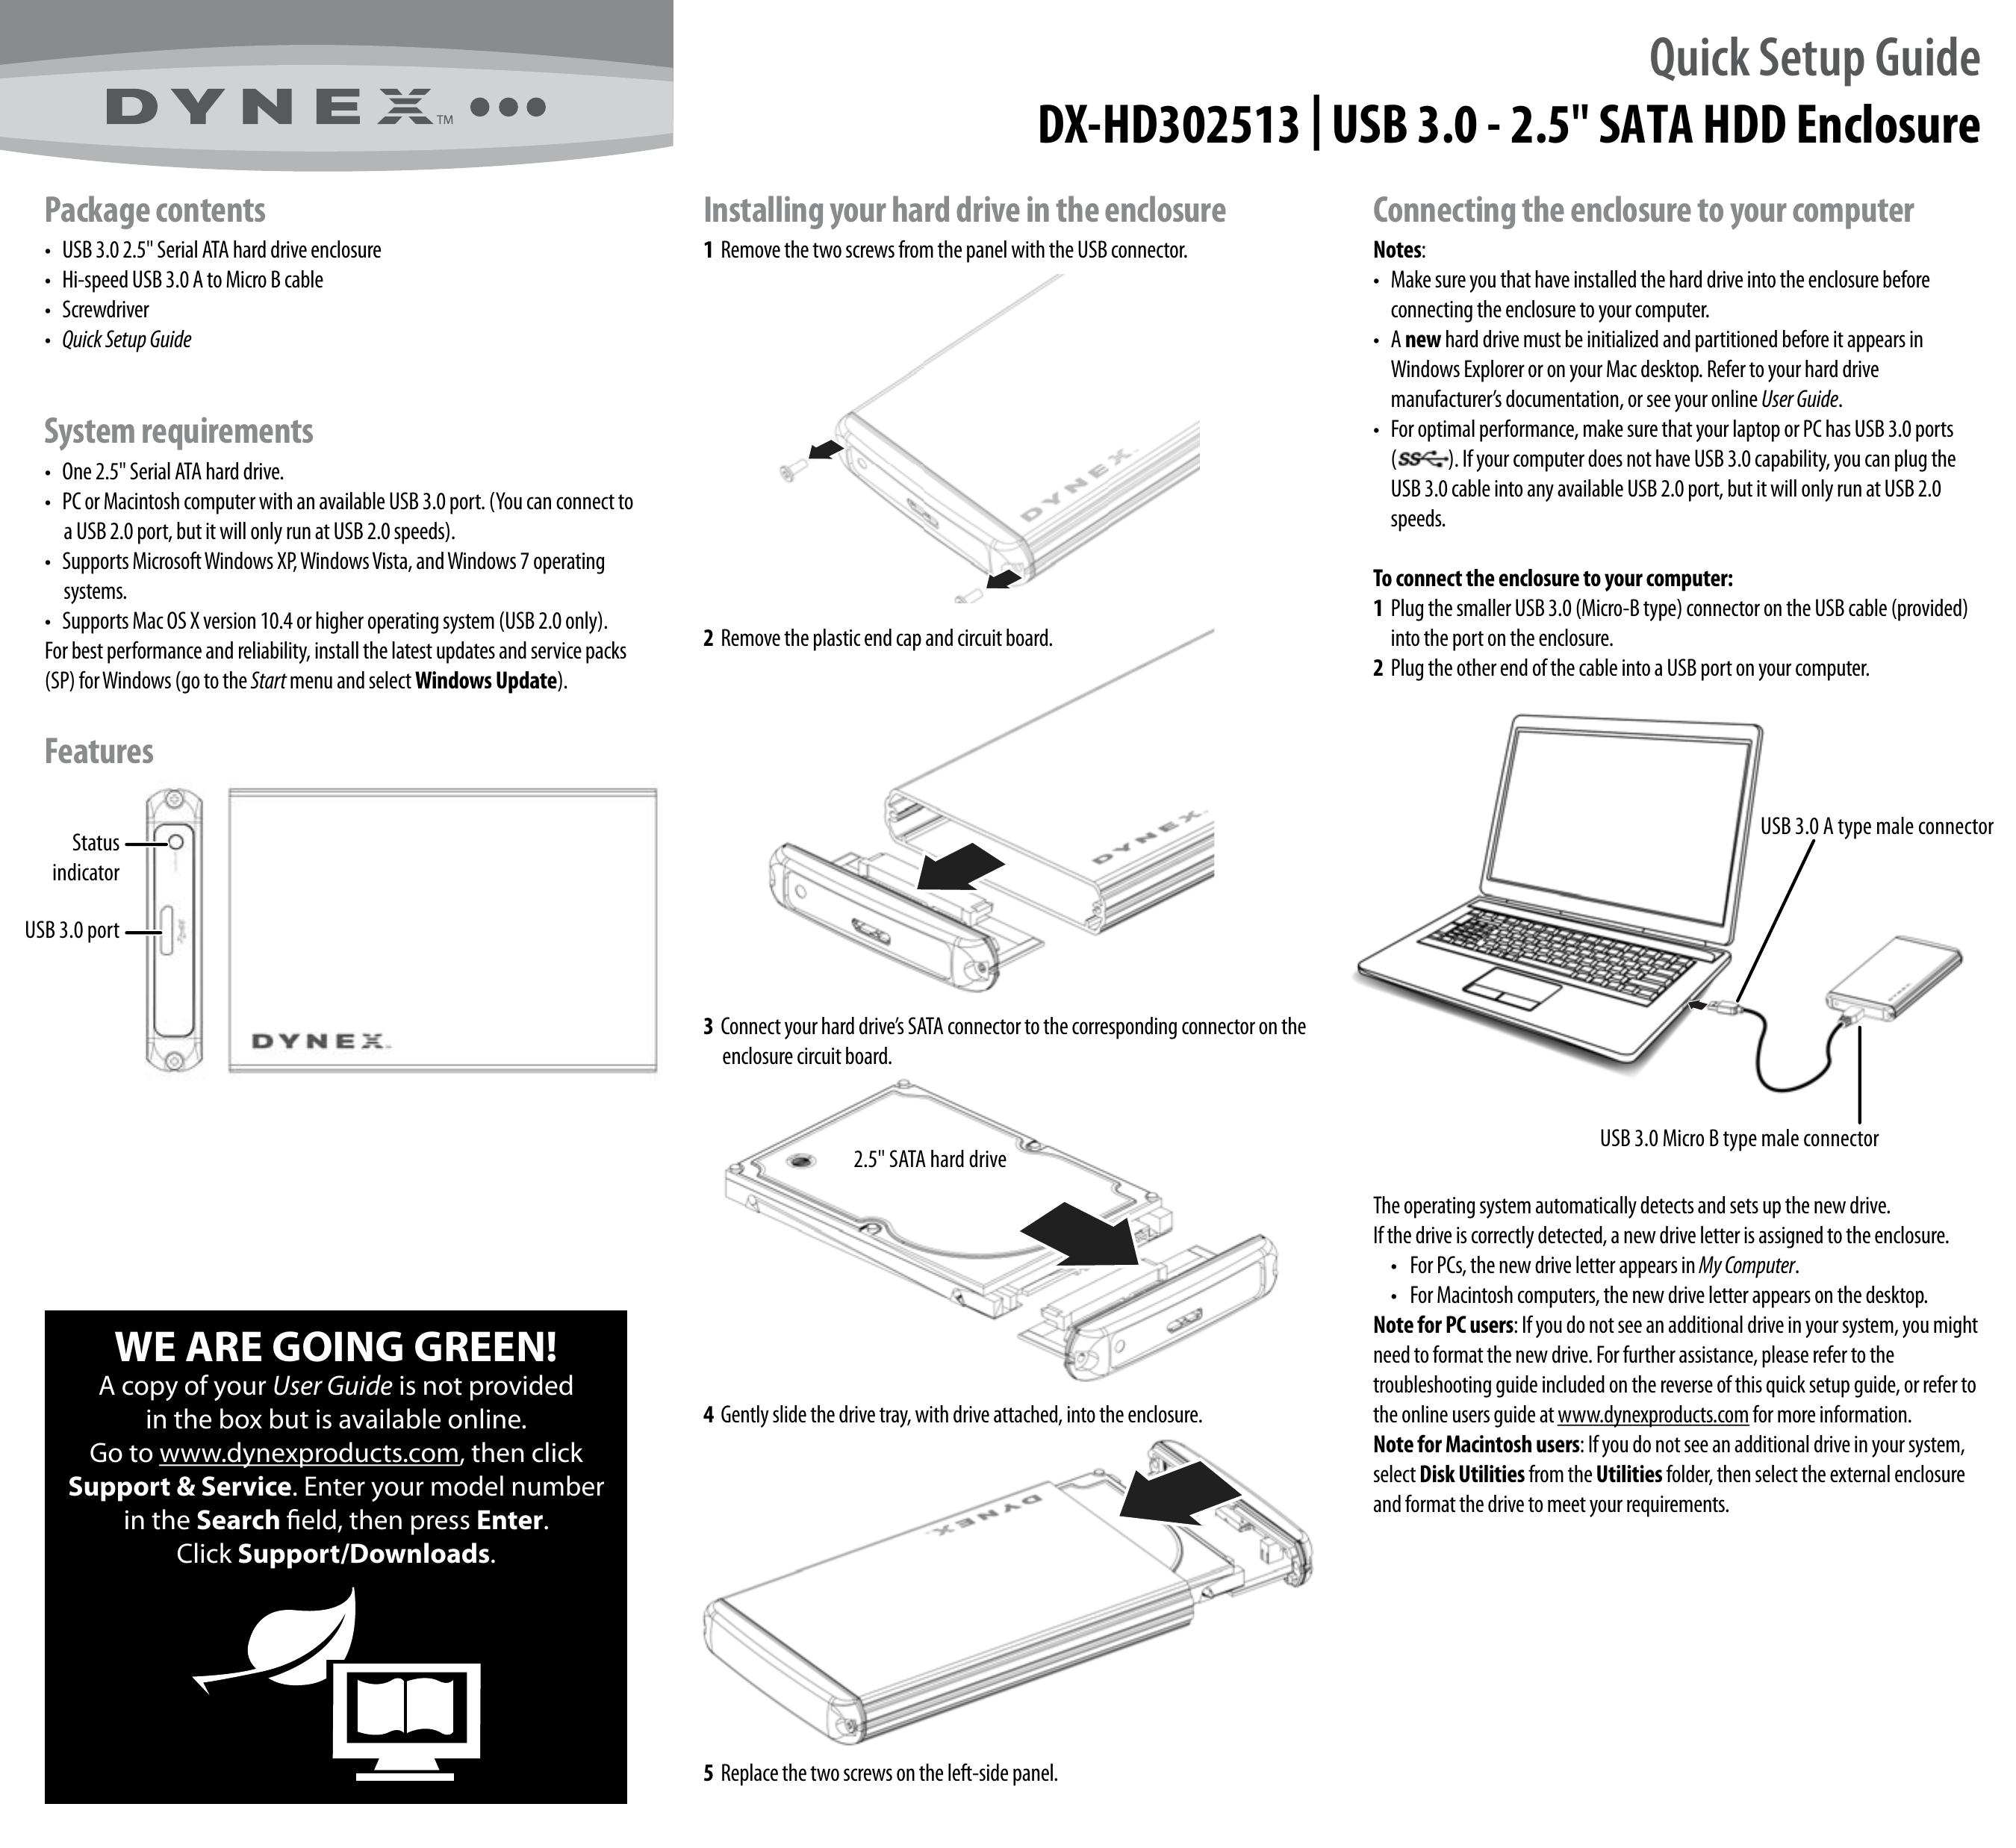 Dynex DX-HD302513 Security Camera User Manual (Page 1)